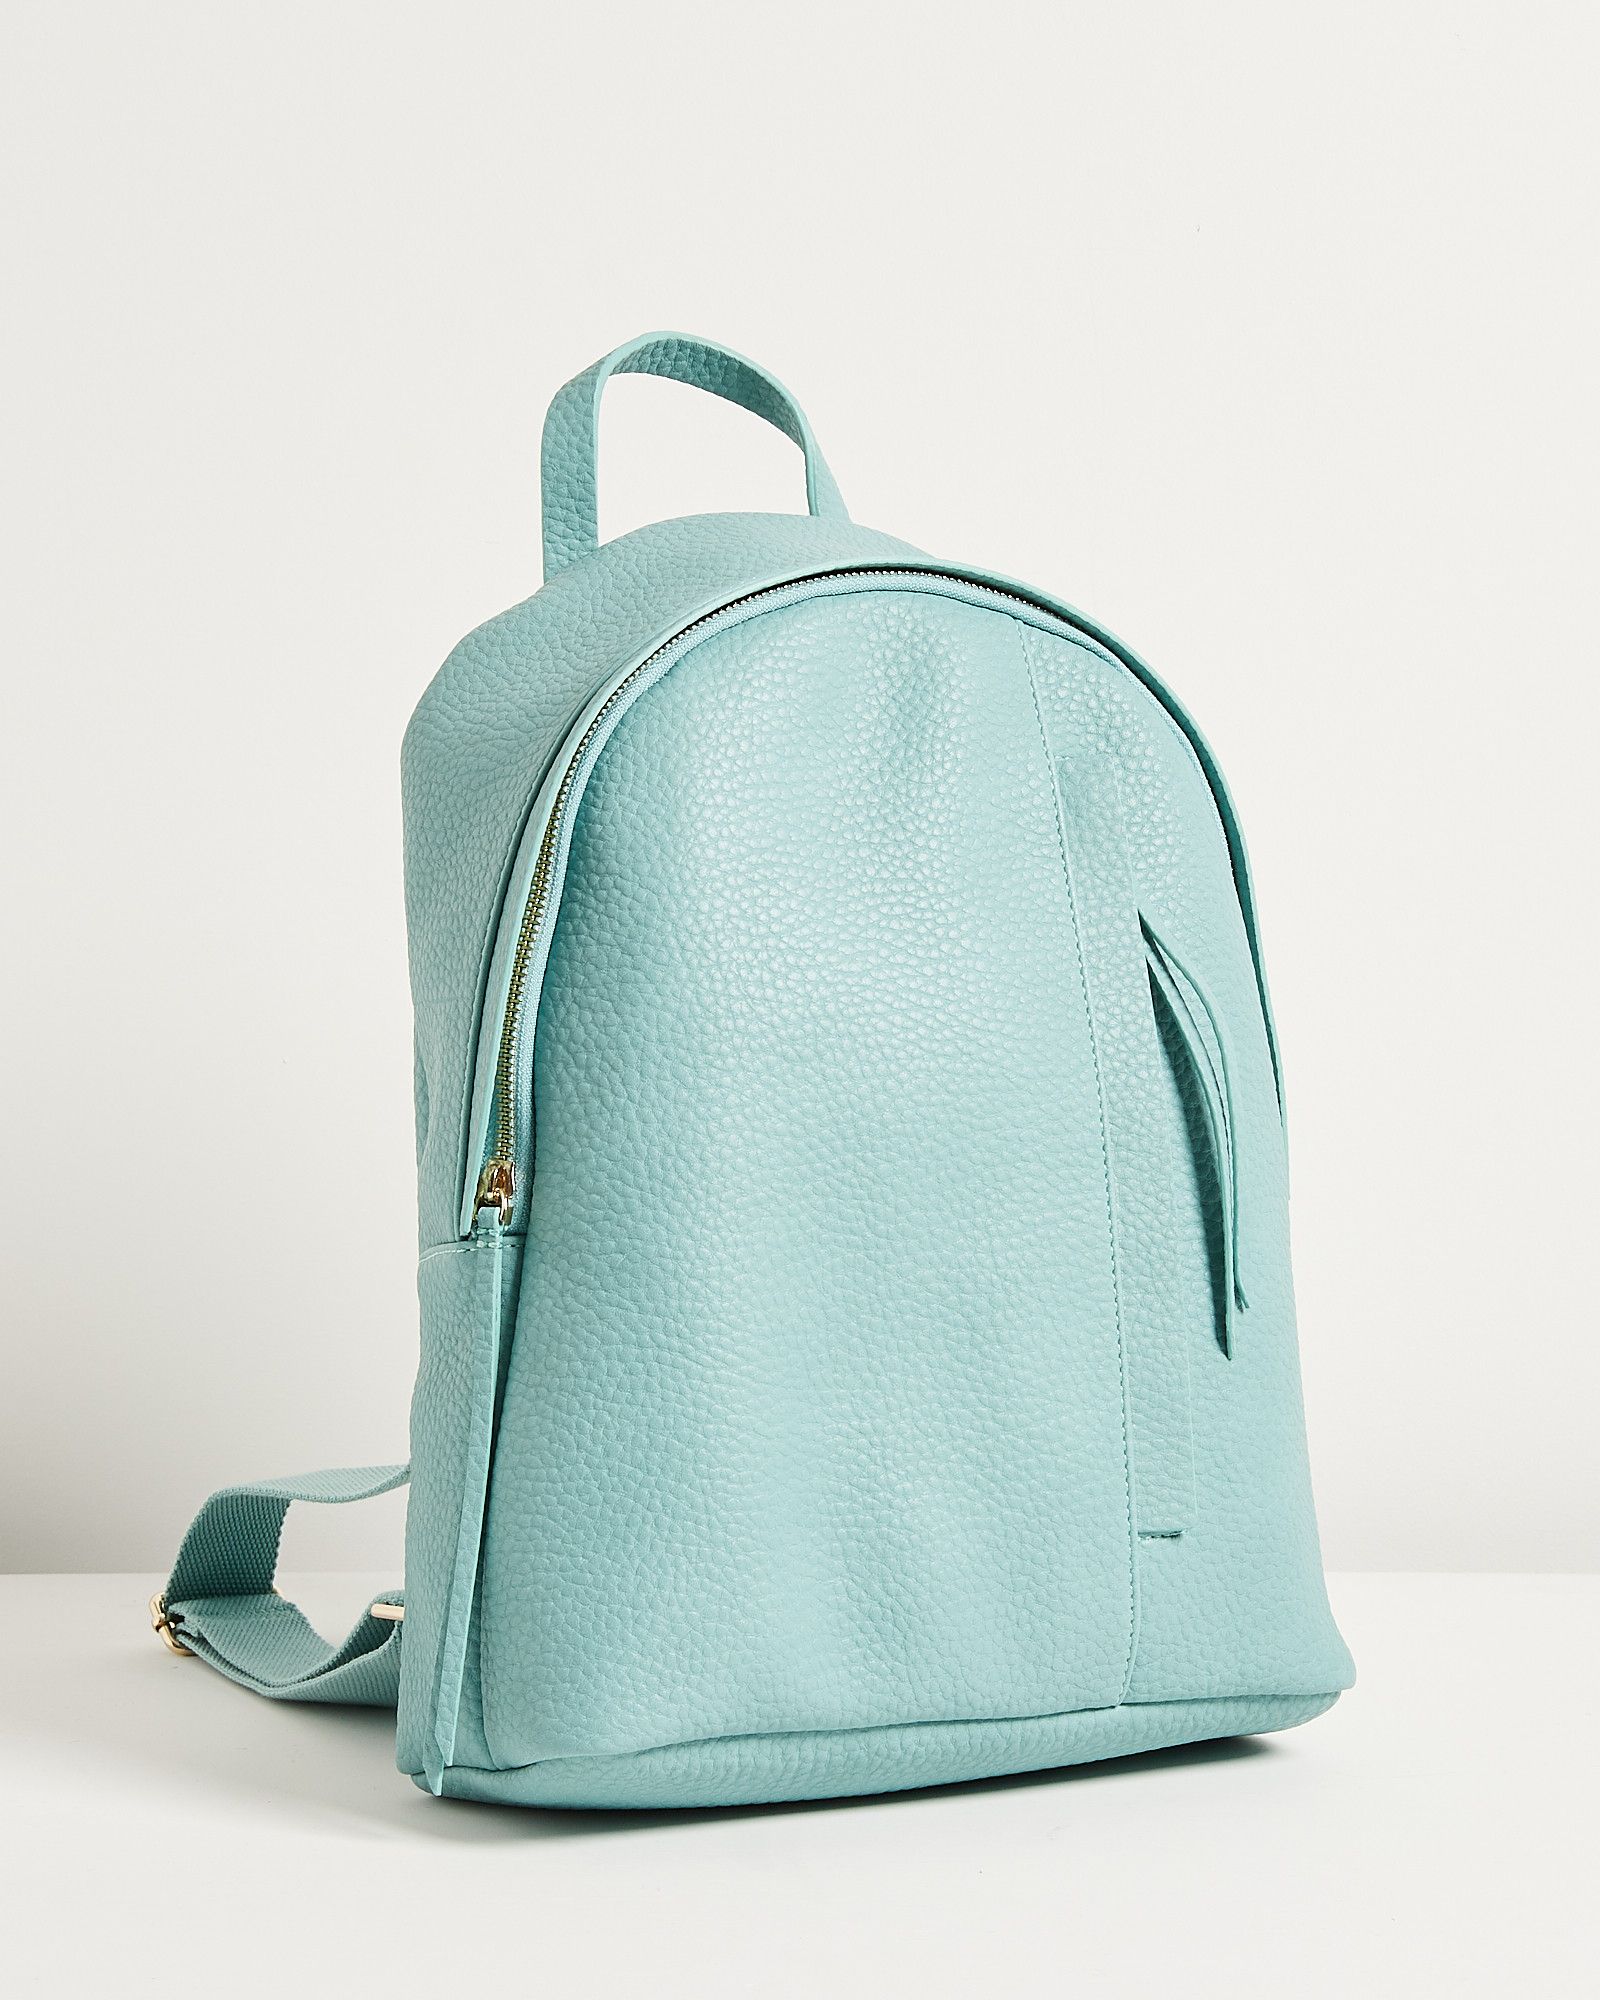 Minnie Zip Feature Mint Green Backpack | Oliver Bonas